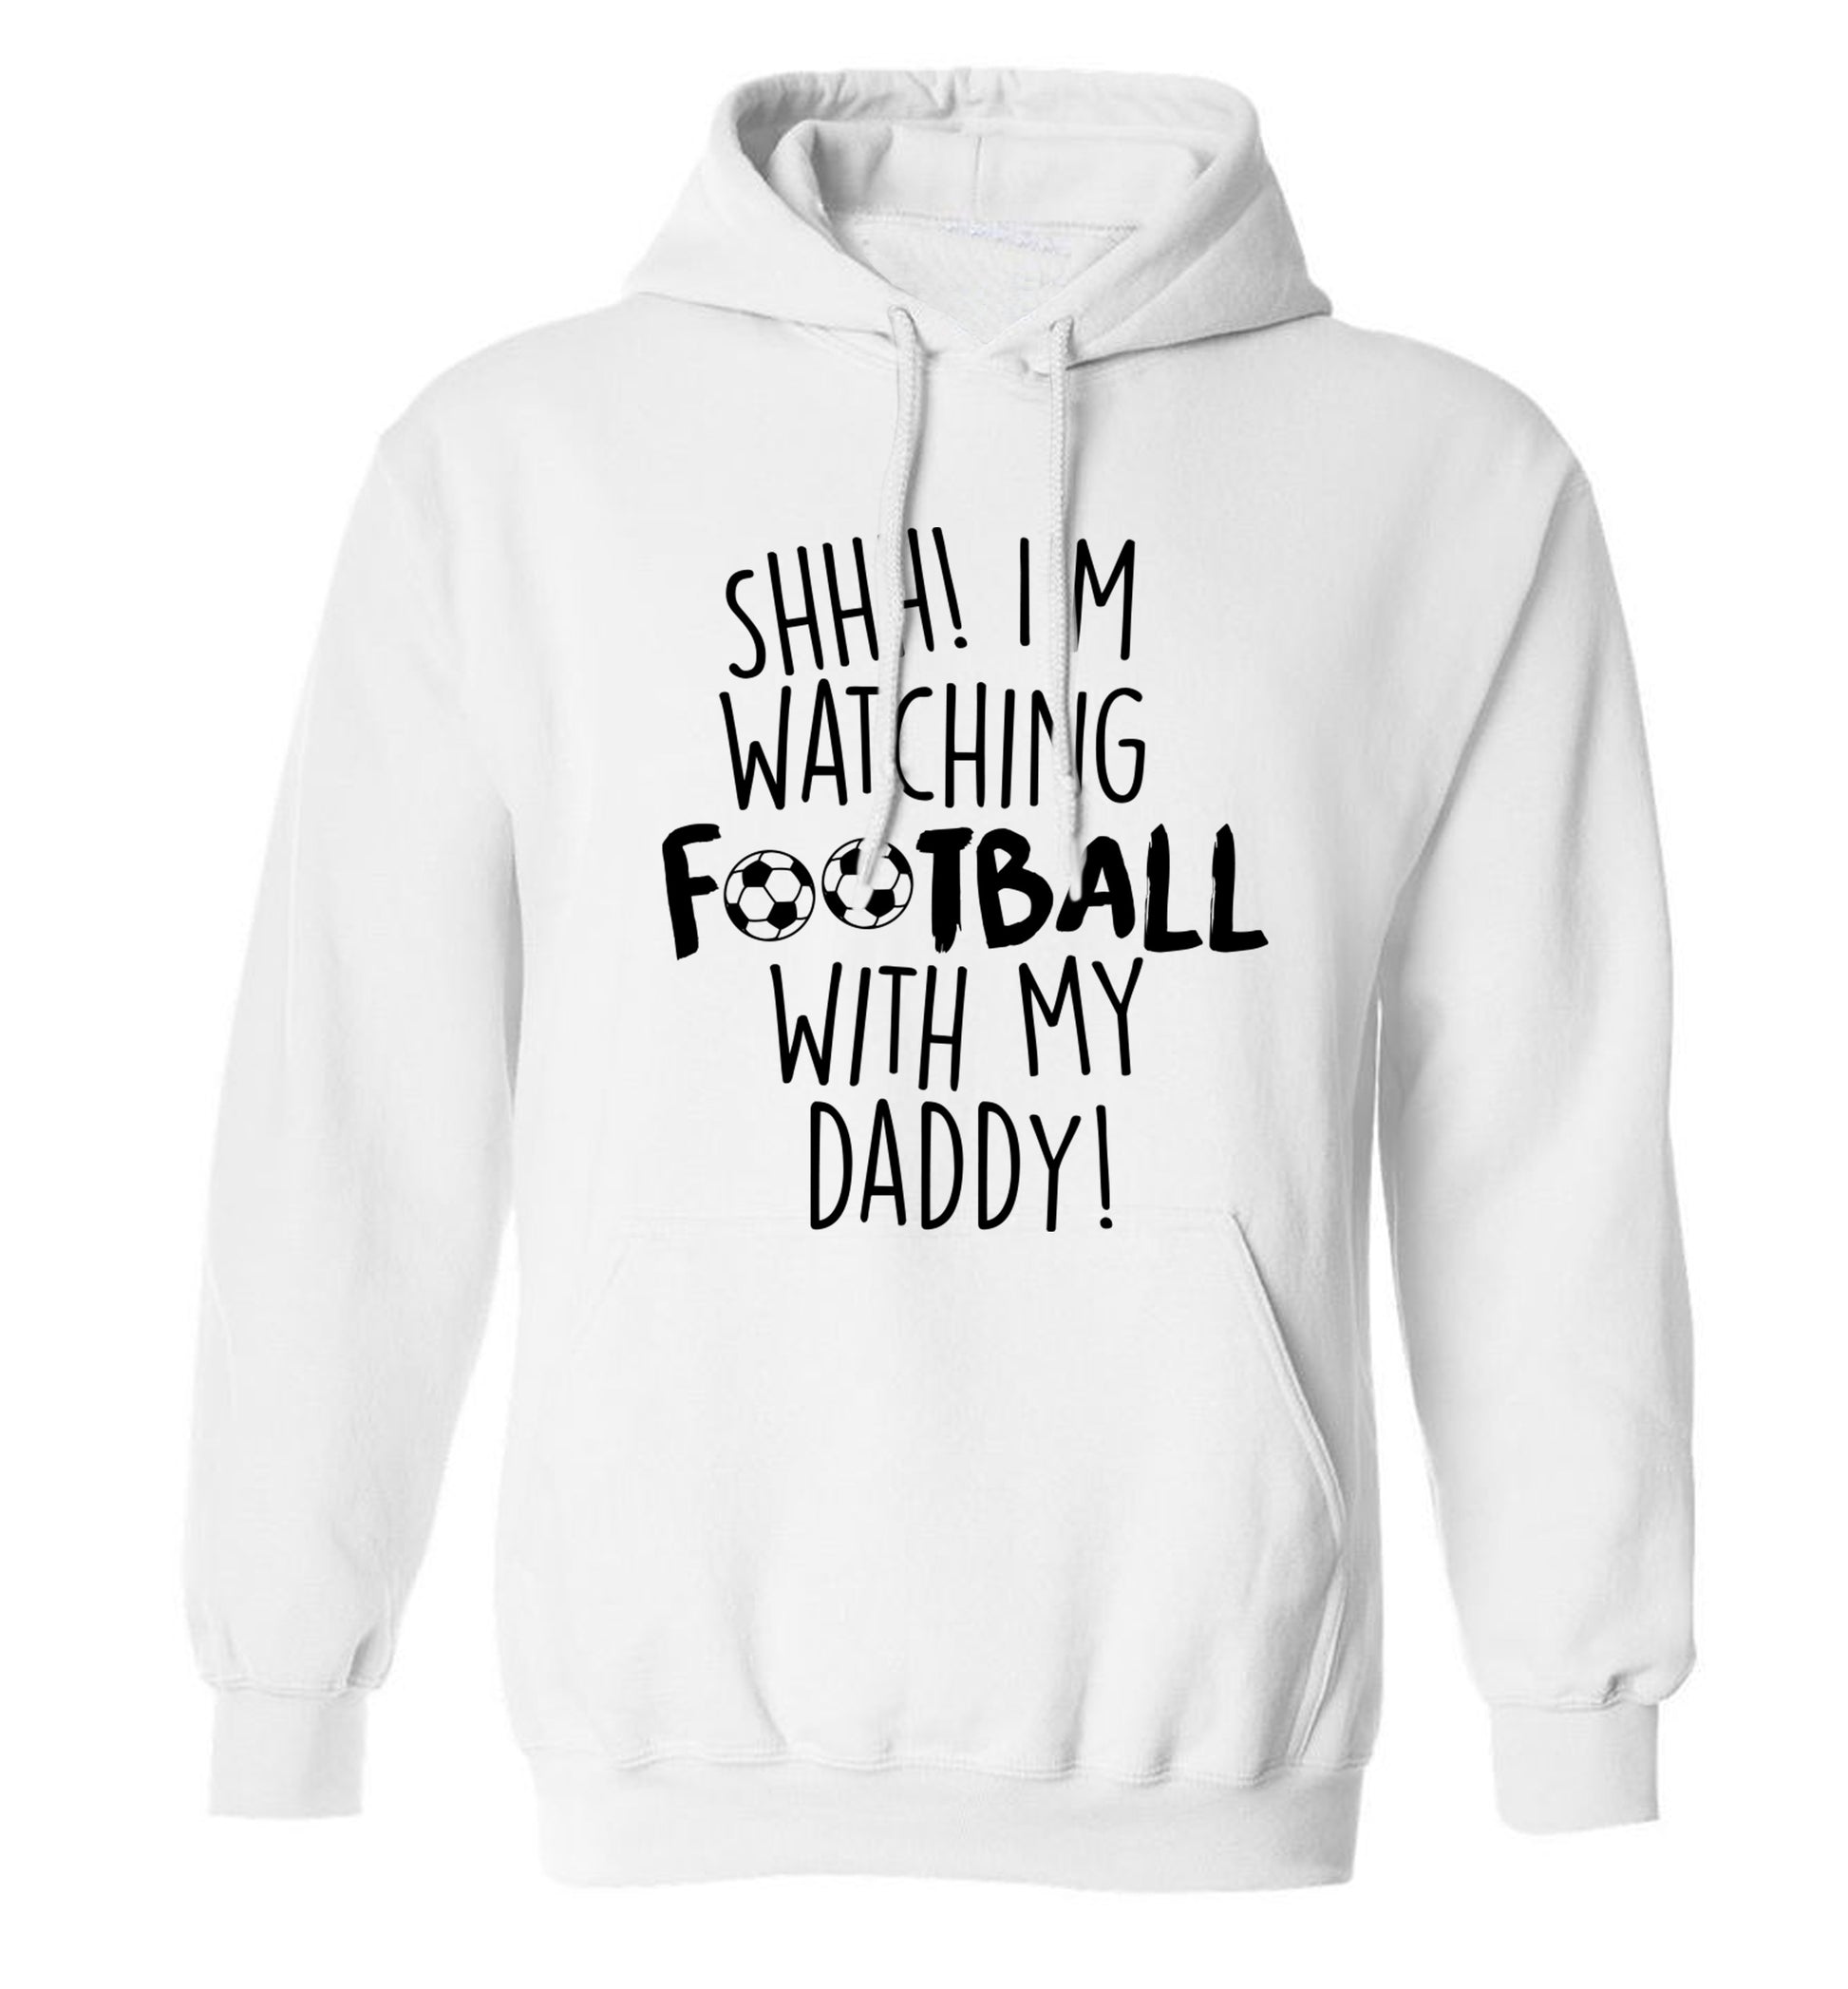 Shhh I'm watching football with my daddy adults unisexwhite hoodie 2XL